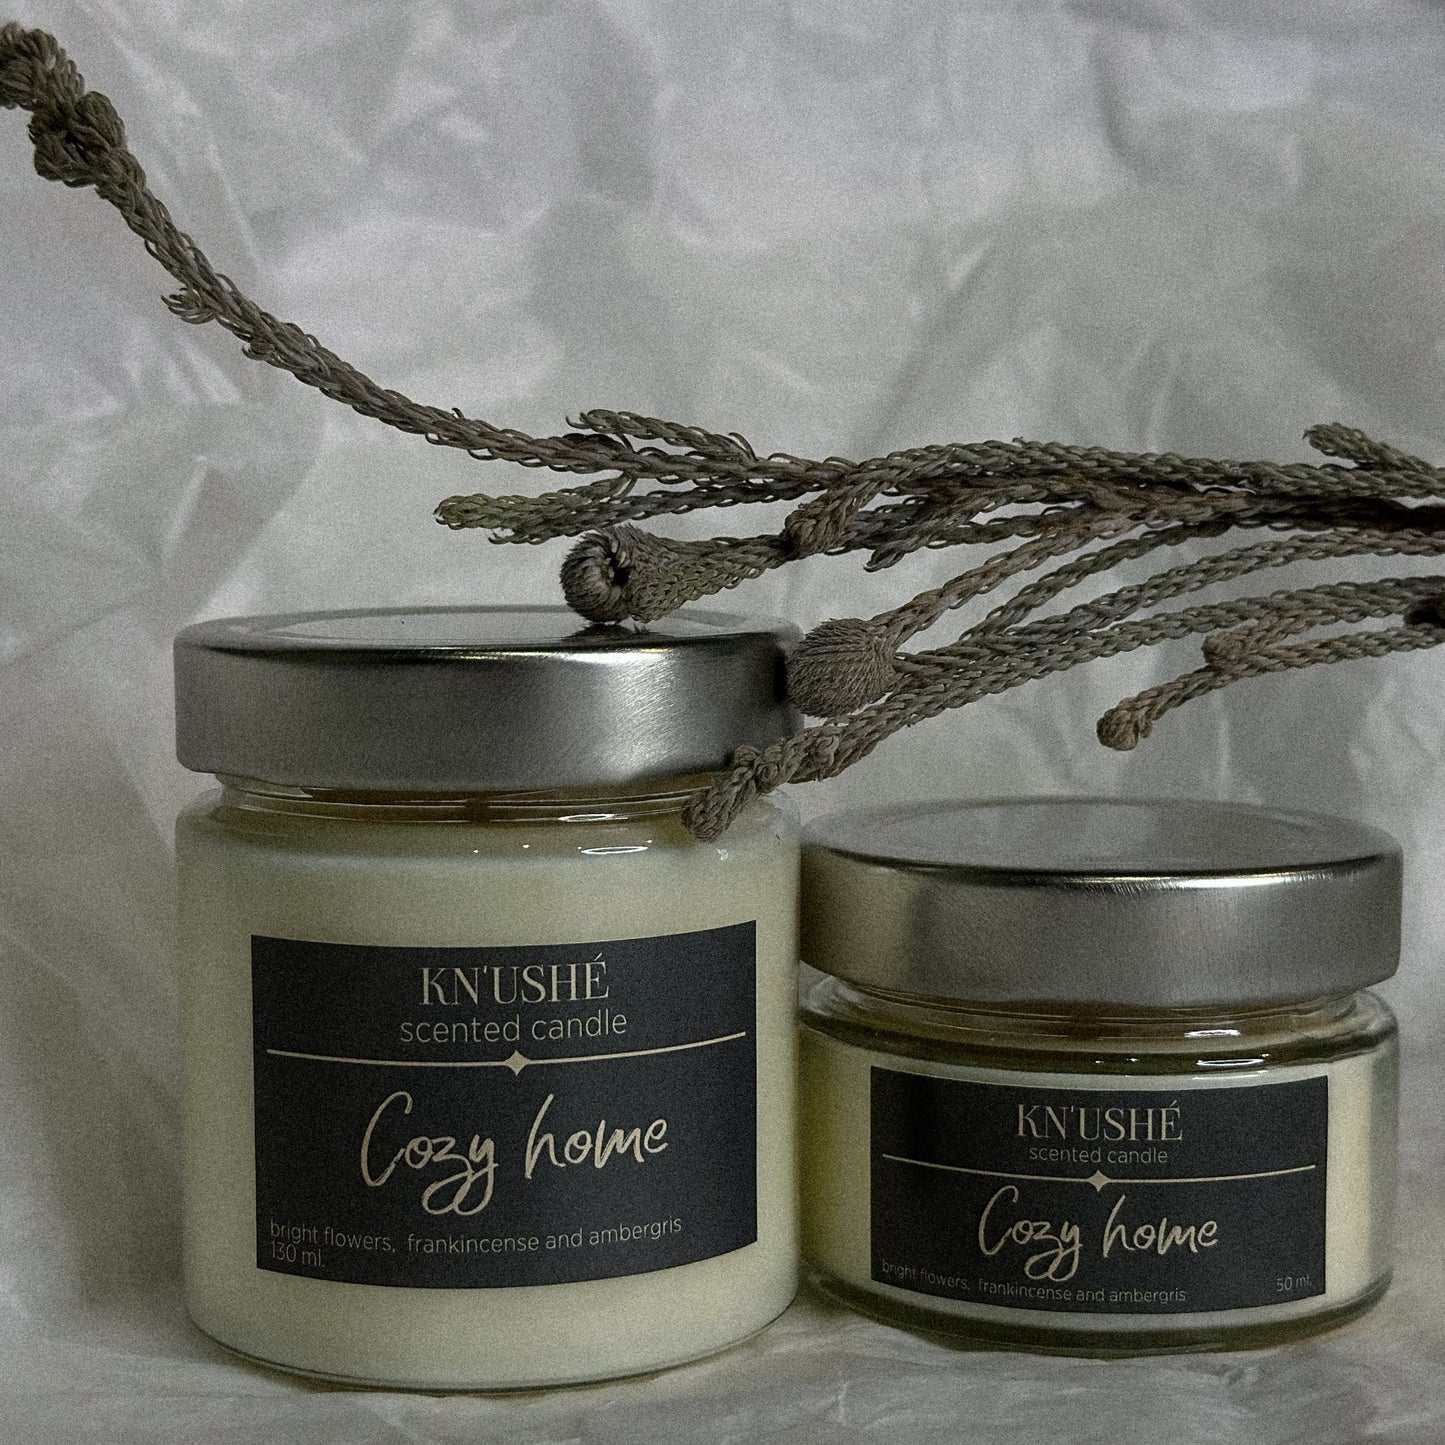 Scented candle made of vegetable soy wax with "Cozy home" scent